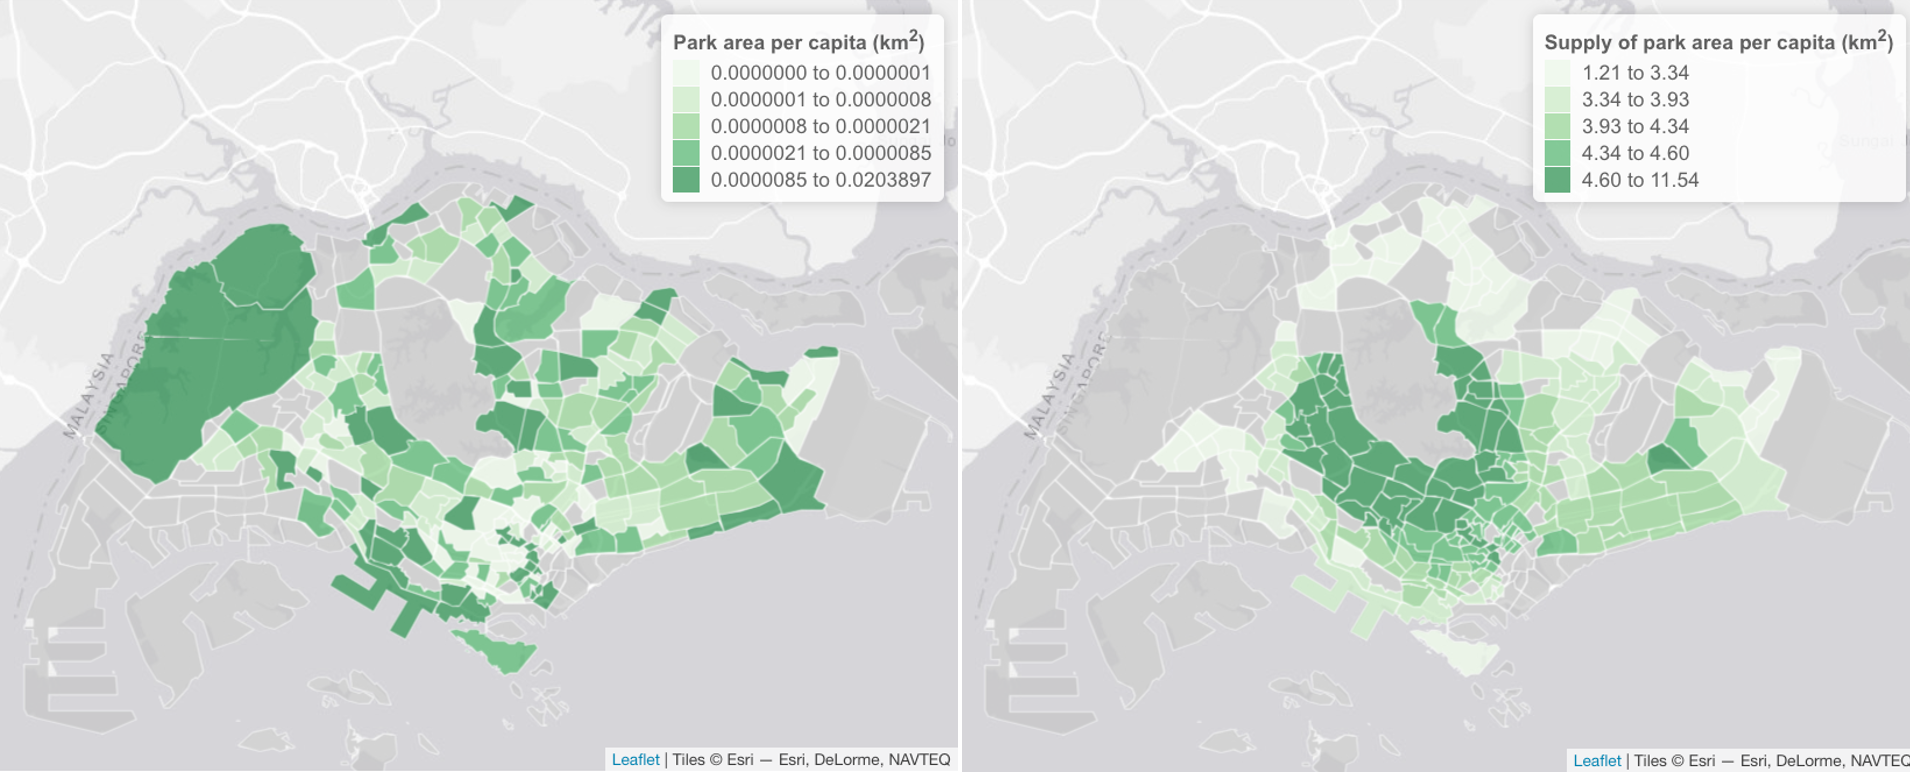 Screenshot: Provision of park area per capita within each subzone in Singapore, as measured by the total park area per subzone (left panel); and by the supply of park area to residents within residential buildings (right panel). Based on OSM data (2020). For the calculation of the supply value per building, the value for Coefficient c was set at 0.302. The color palettes are binned according to quantile values.